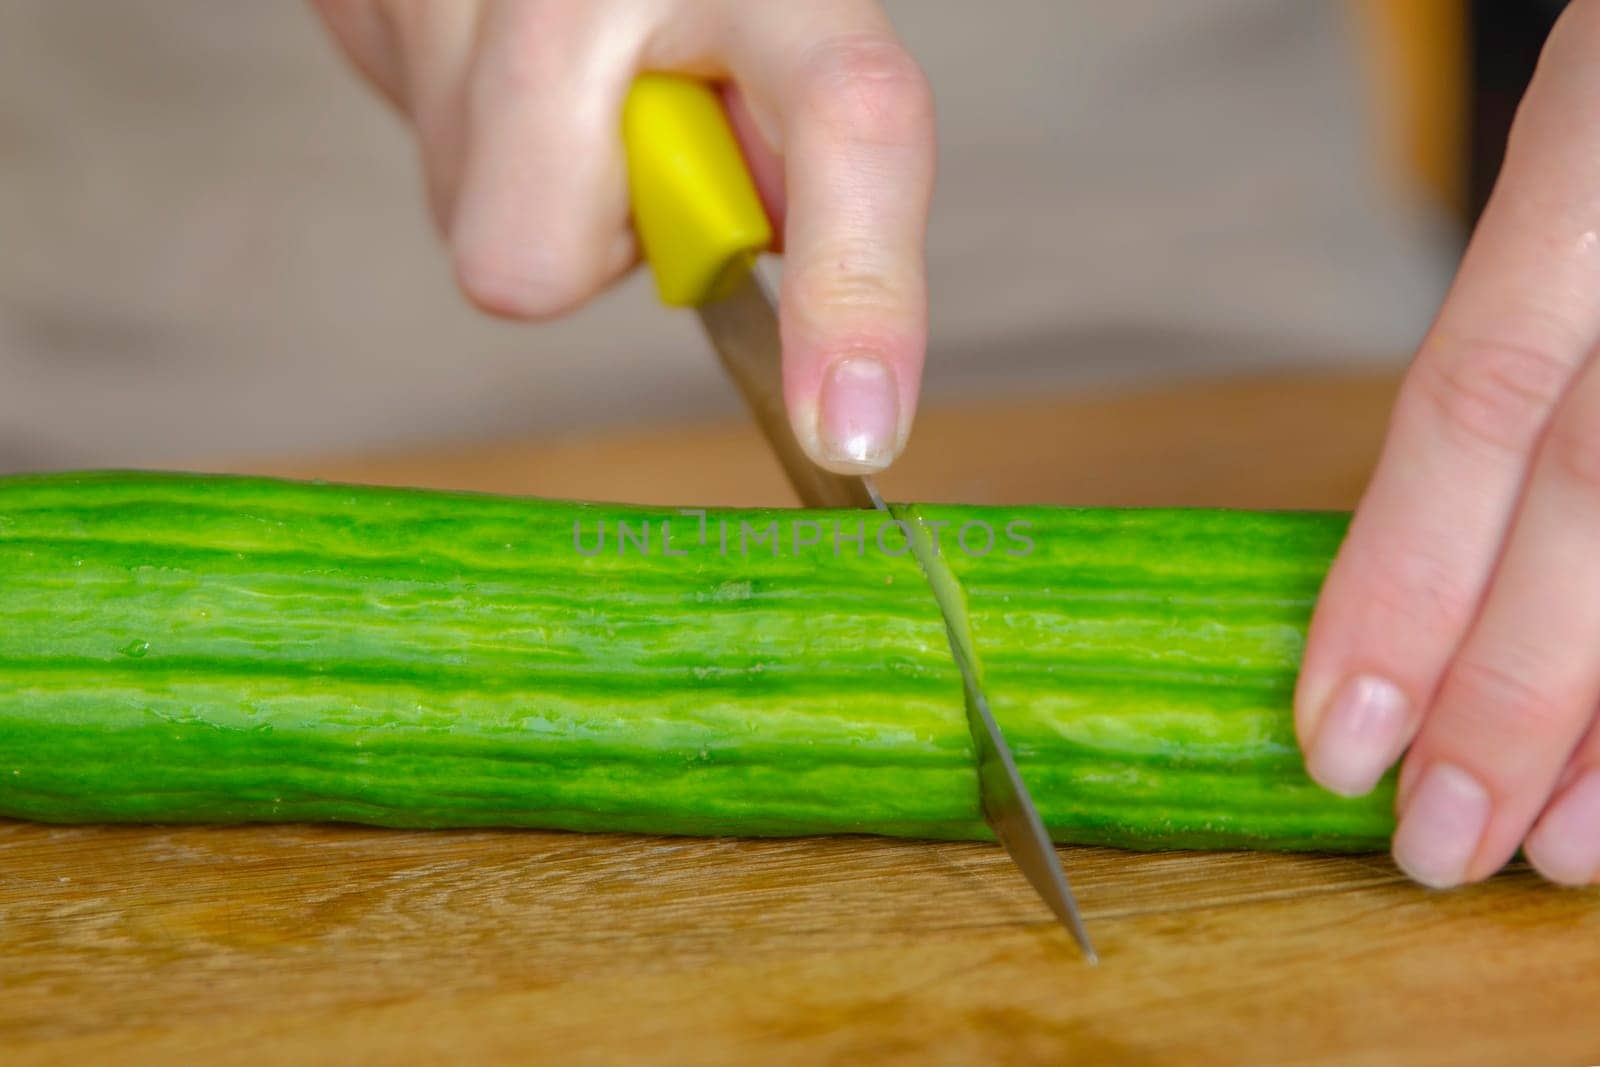 A woman's hands cut a green cucumber in half, close-up. Long green cucumber are suitable for salads or as a side dish. Preparing cucumbers for salad